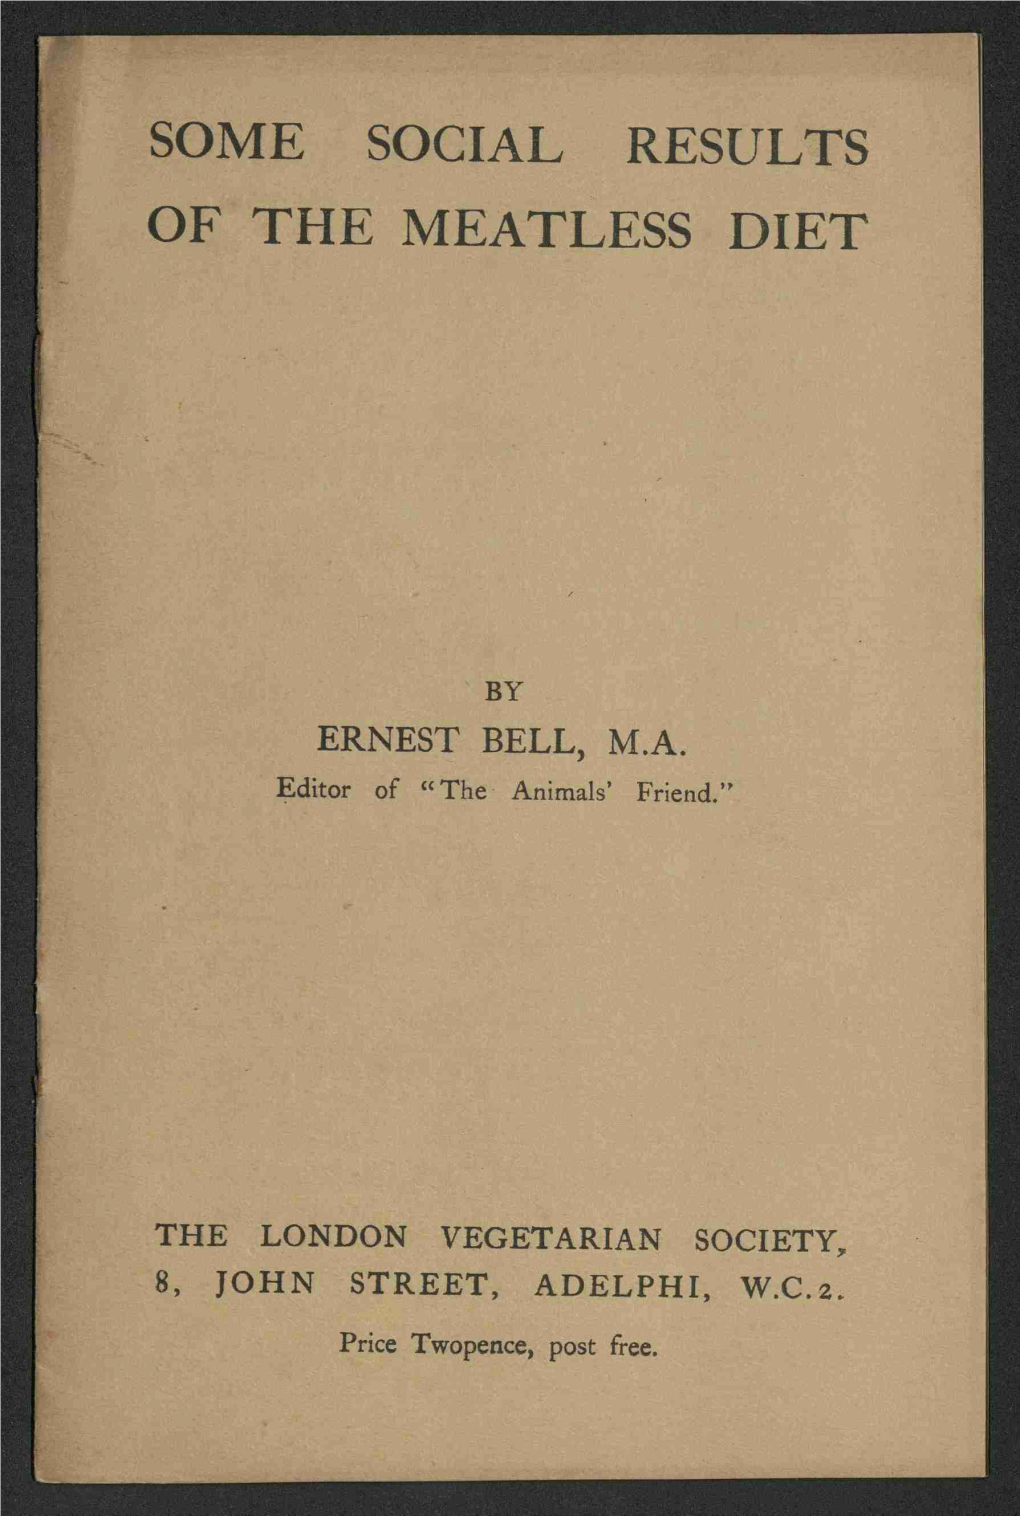 SOME SOCIAL RESULTS OFTHE MEATLESS DIET by ERNEST BELL, M.A. Editor of “The Animals' Friend.” the LONDON VEGETARIAN SOCIET